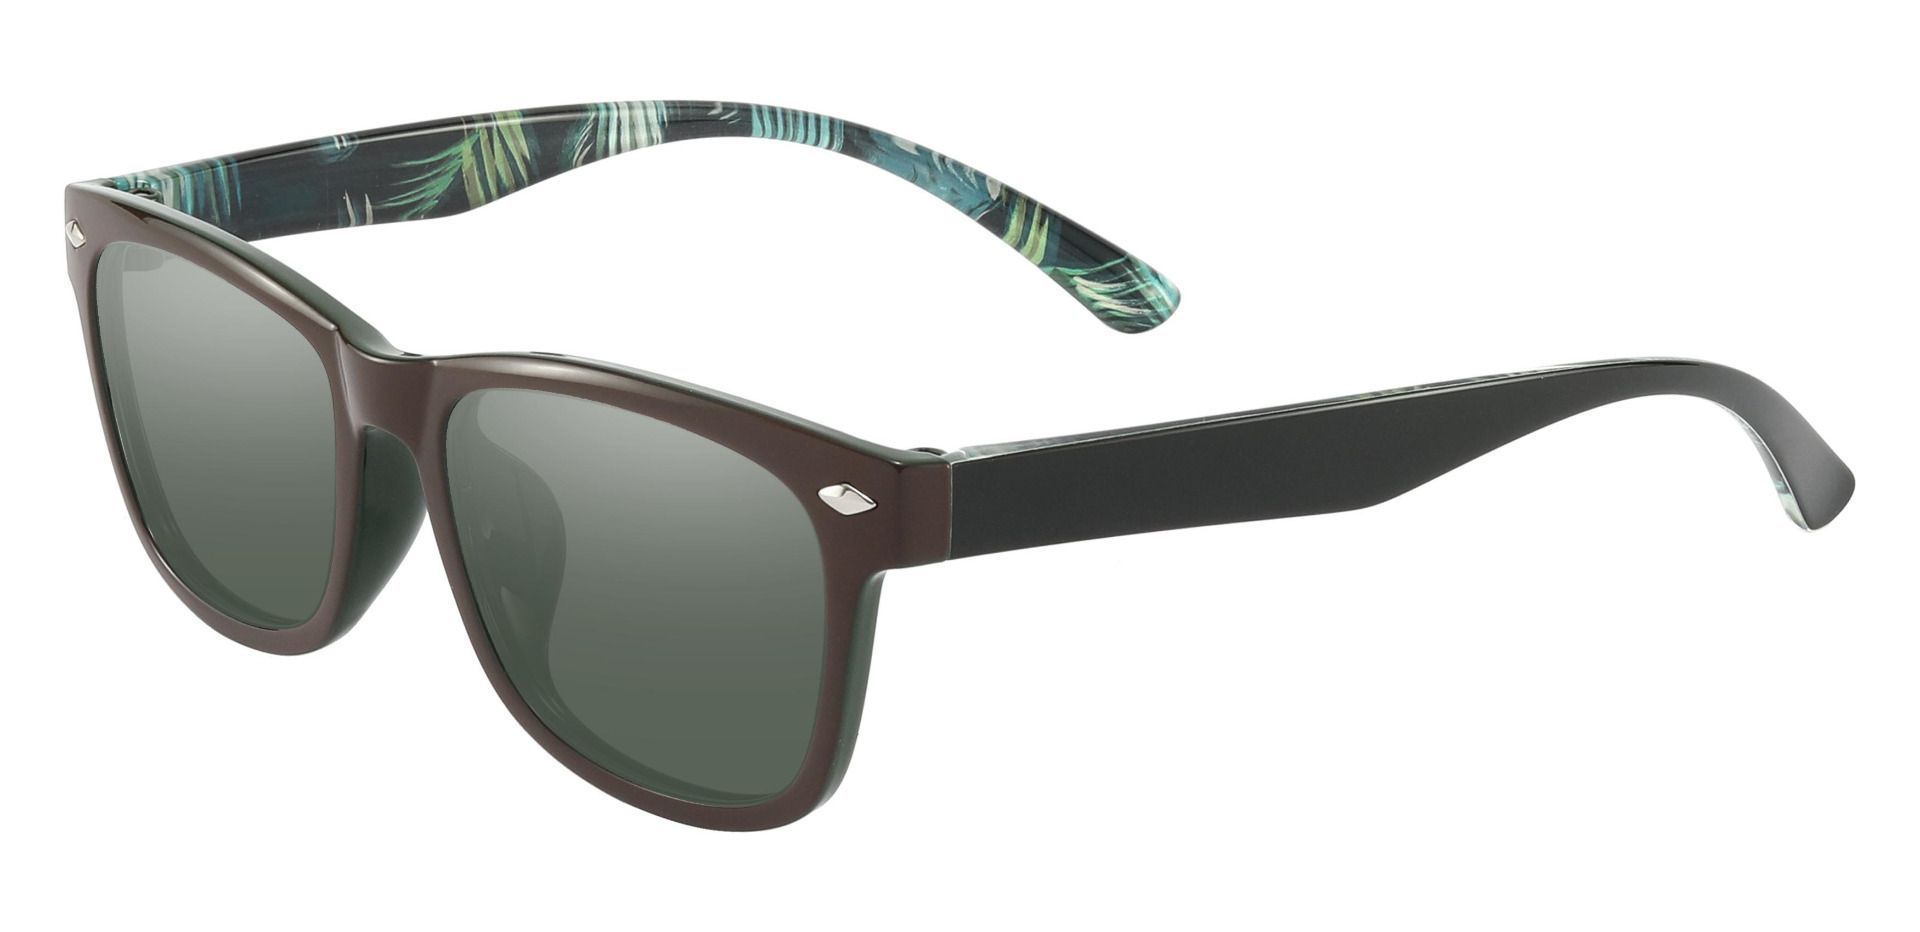 Shaler Square Non-Rx Sunglasses - Brown Frame With Green Lenses